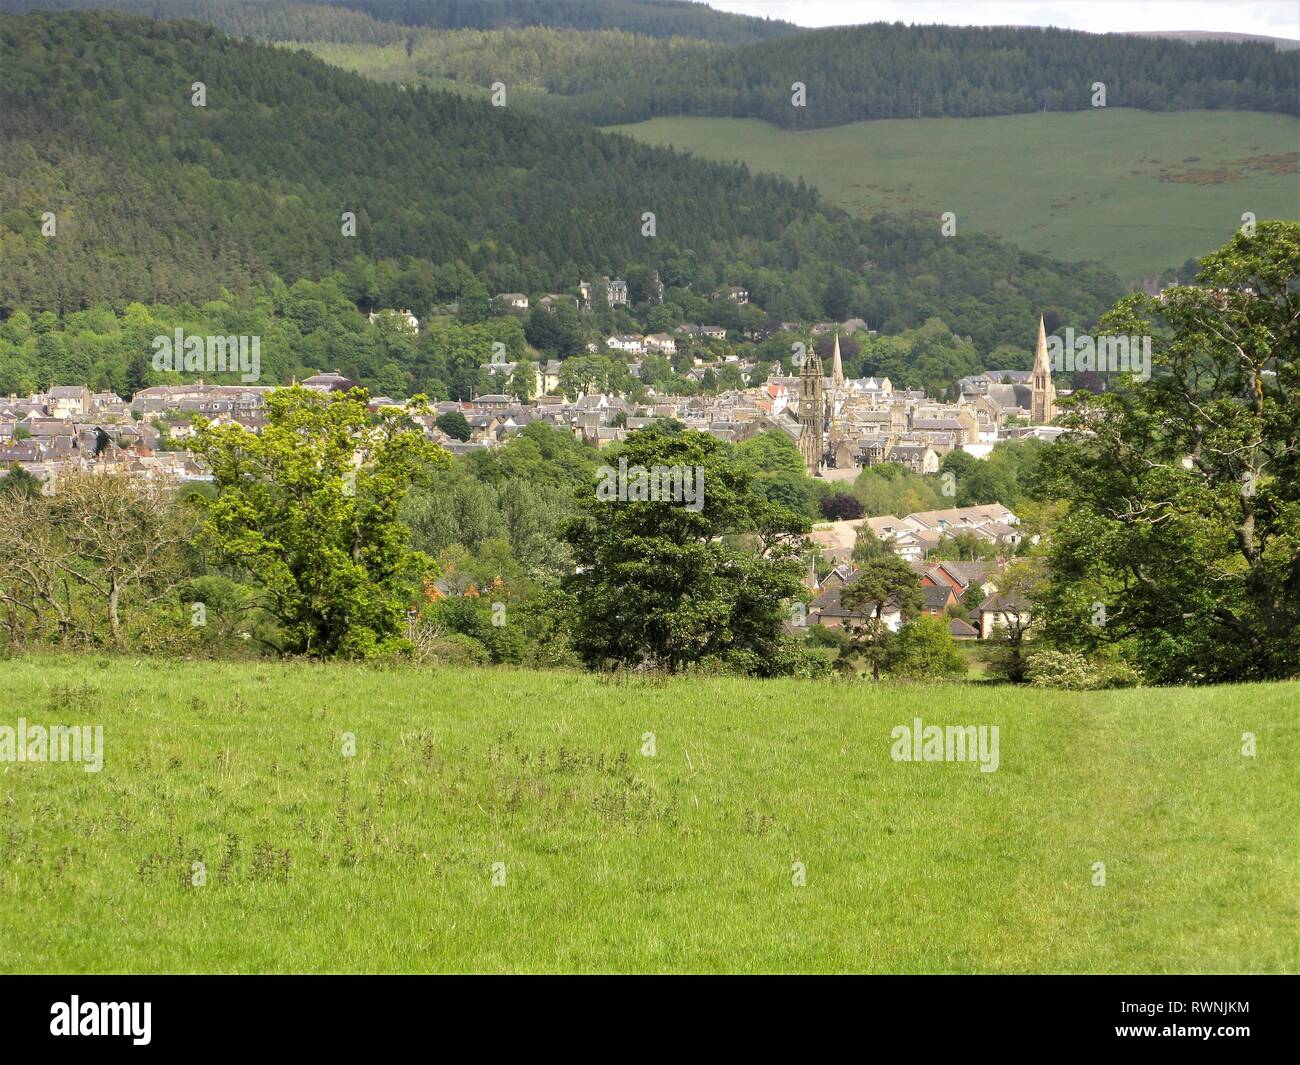 View over the town of Peebles situated in a green valley in the Scottish Borders, Scotland Stock Photo